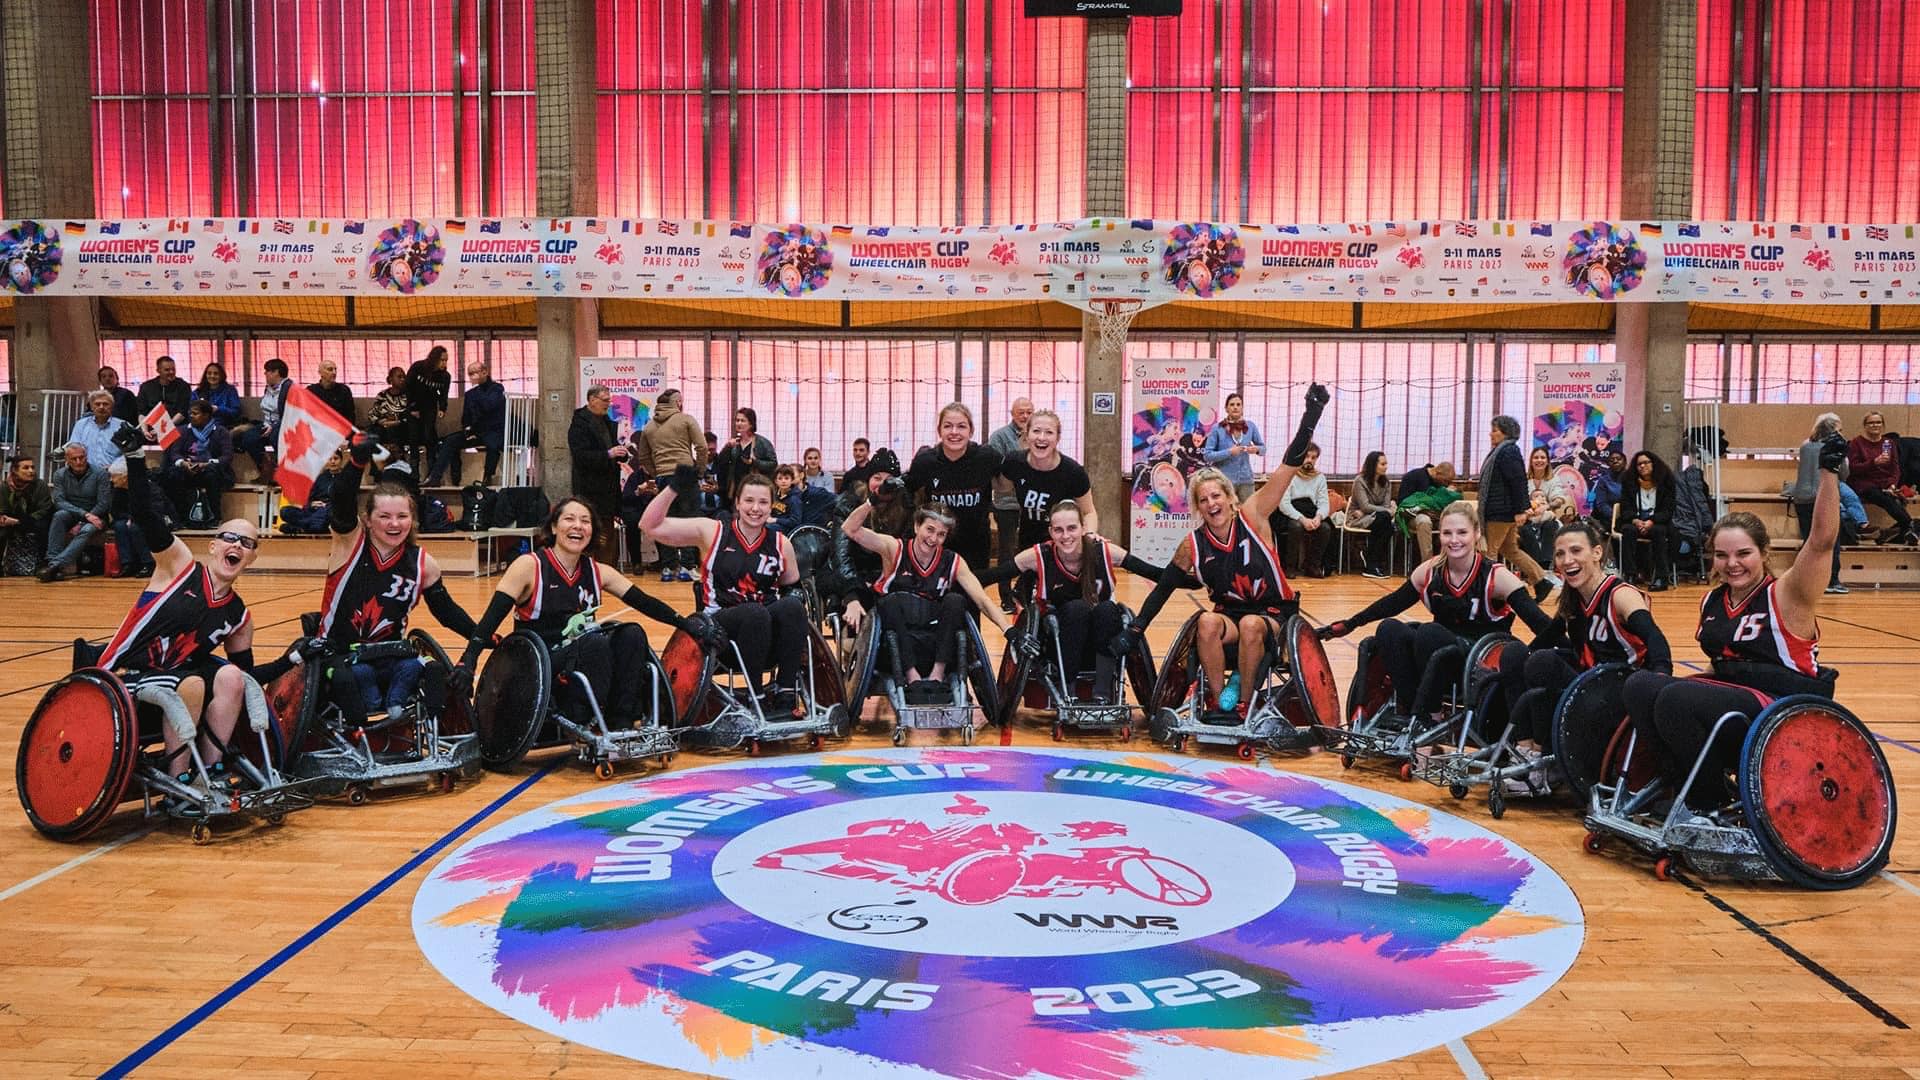 The women's world cup wheelchair rugby team celebrating at the competition in Paris. 